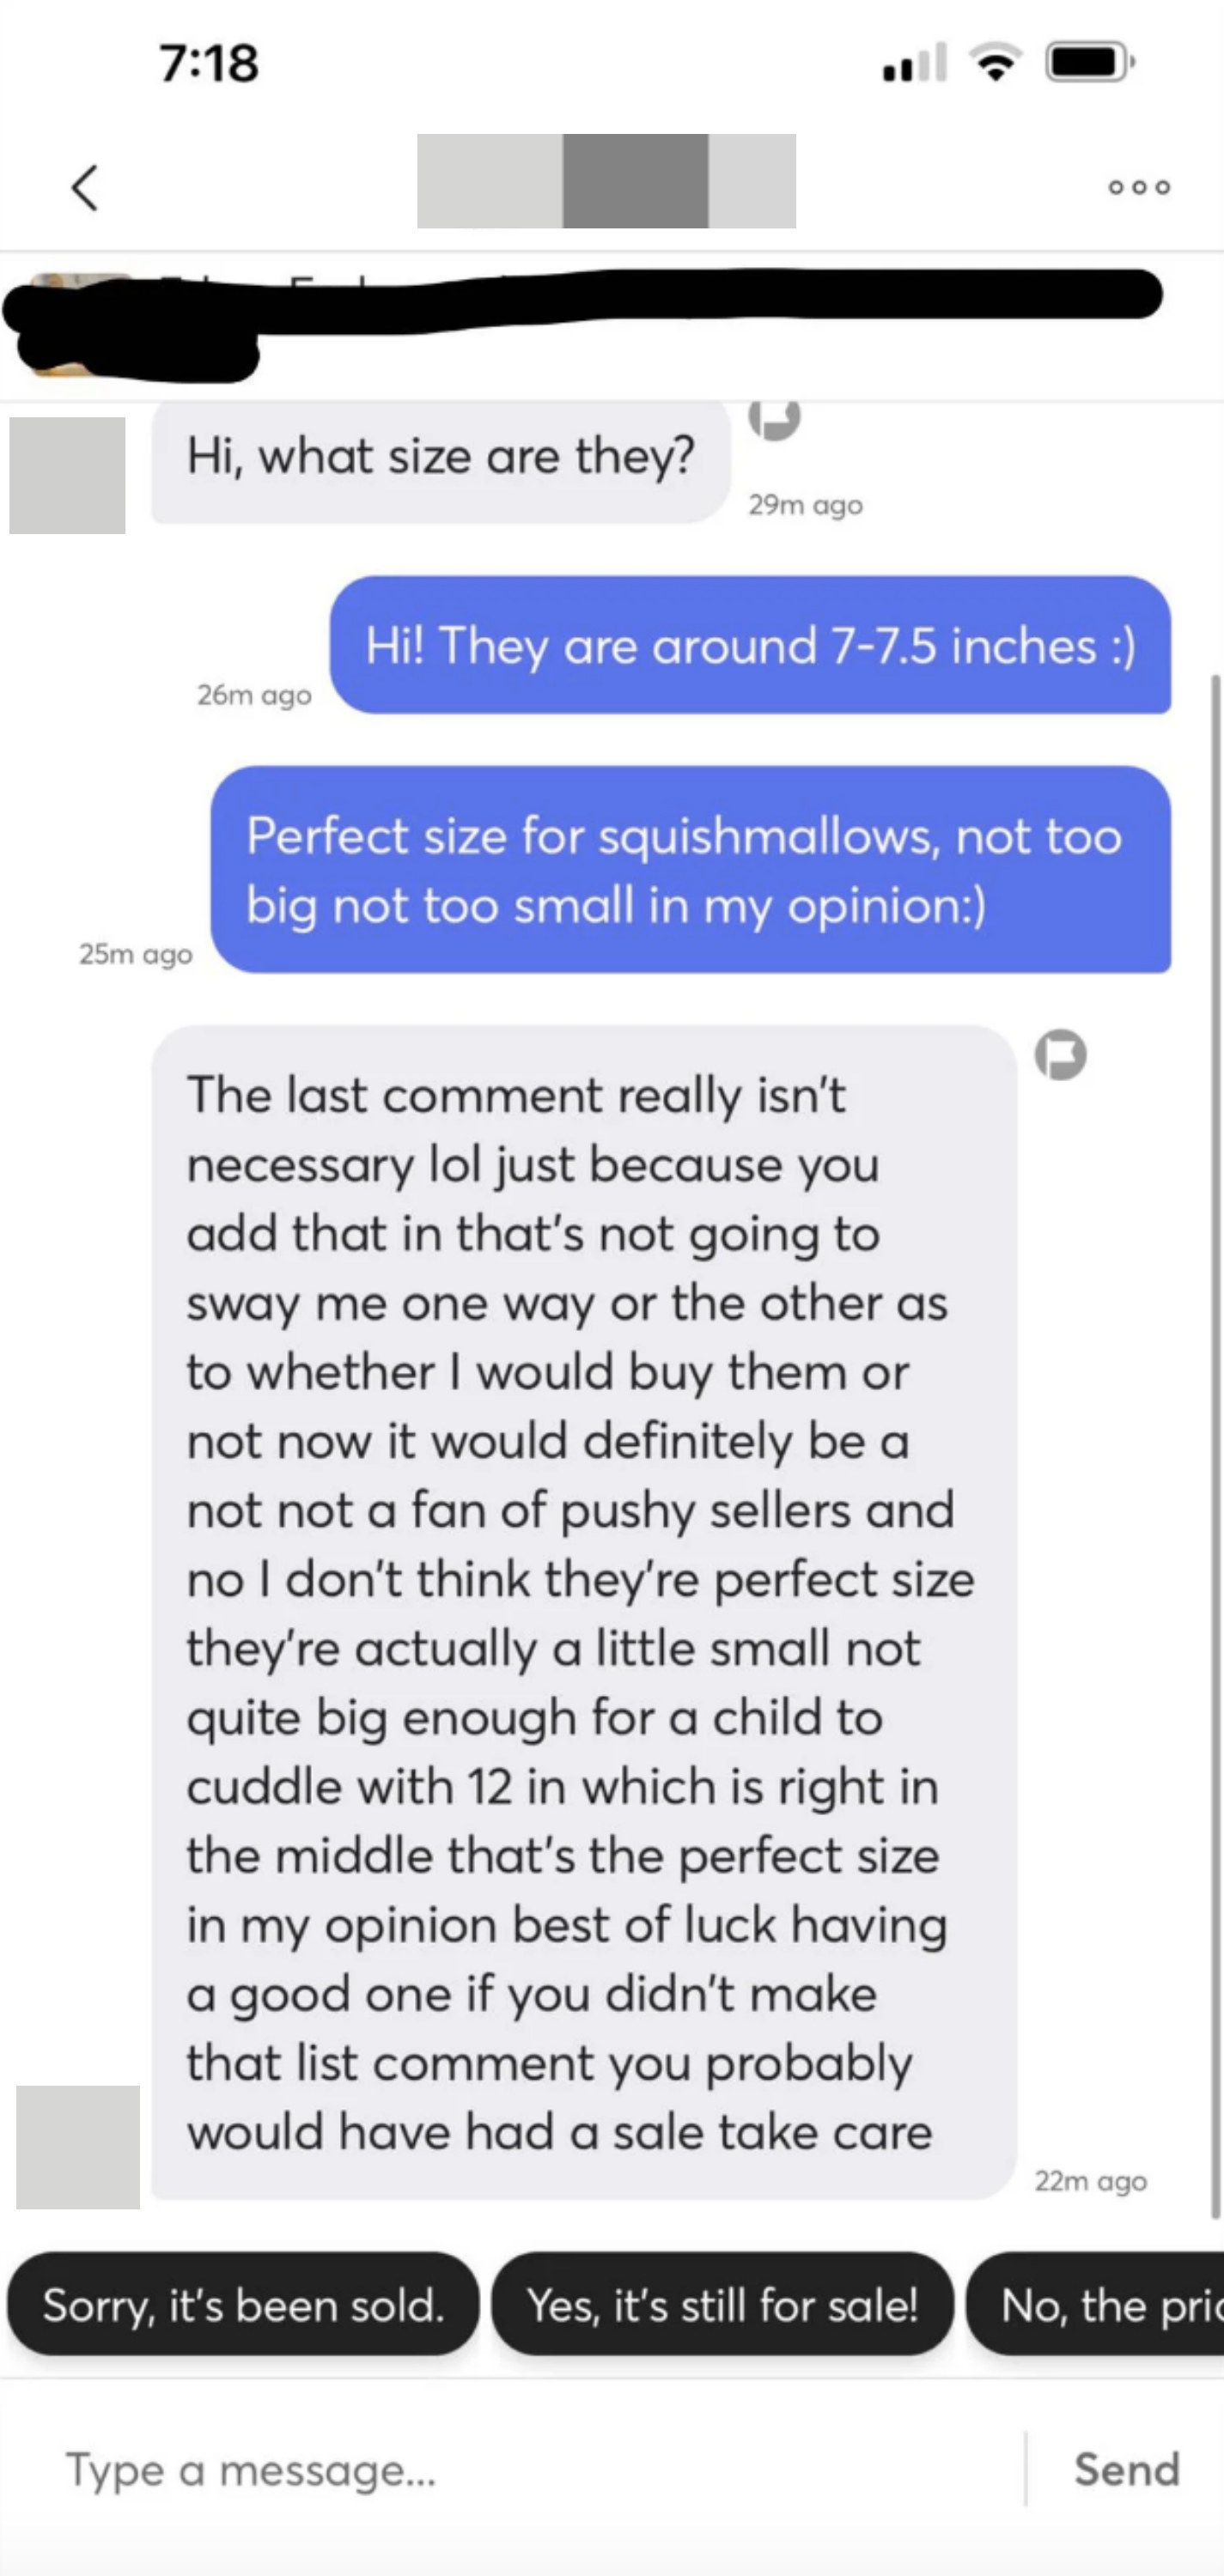 Seller says item is &quot;perfect size for squishmallows,&quot; and person says the comment wasn&#x27;t necessary and they don&#x27;t like pushy sellers and they probably would have had a sale if they hadn&#x27;t said that; plus, it&#x27;s not the perfect size, it&#x27;s a little small